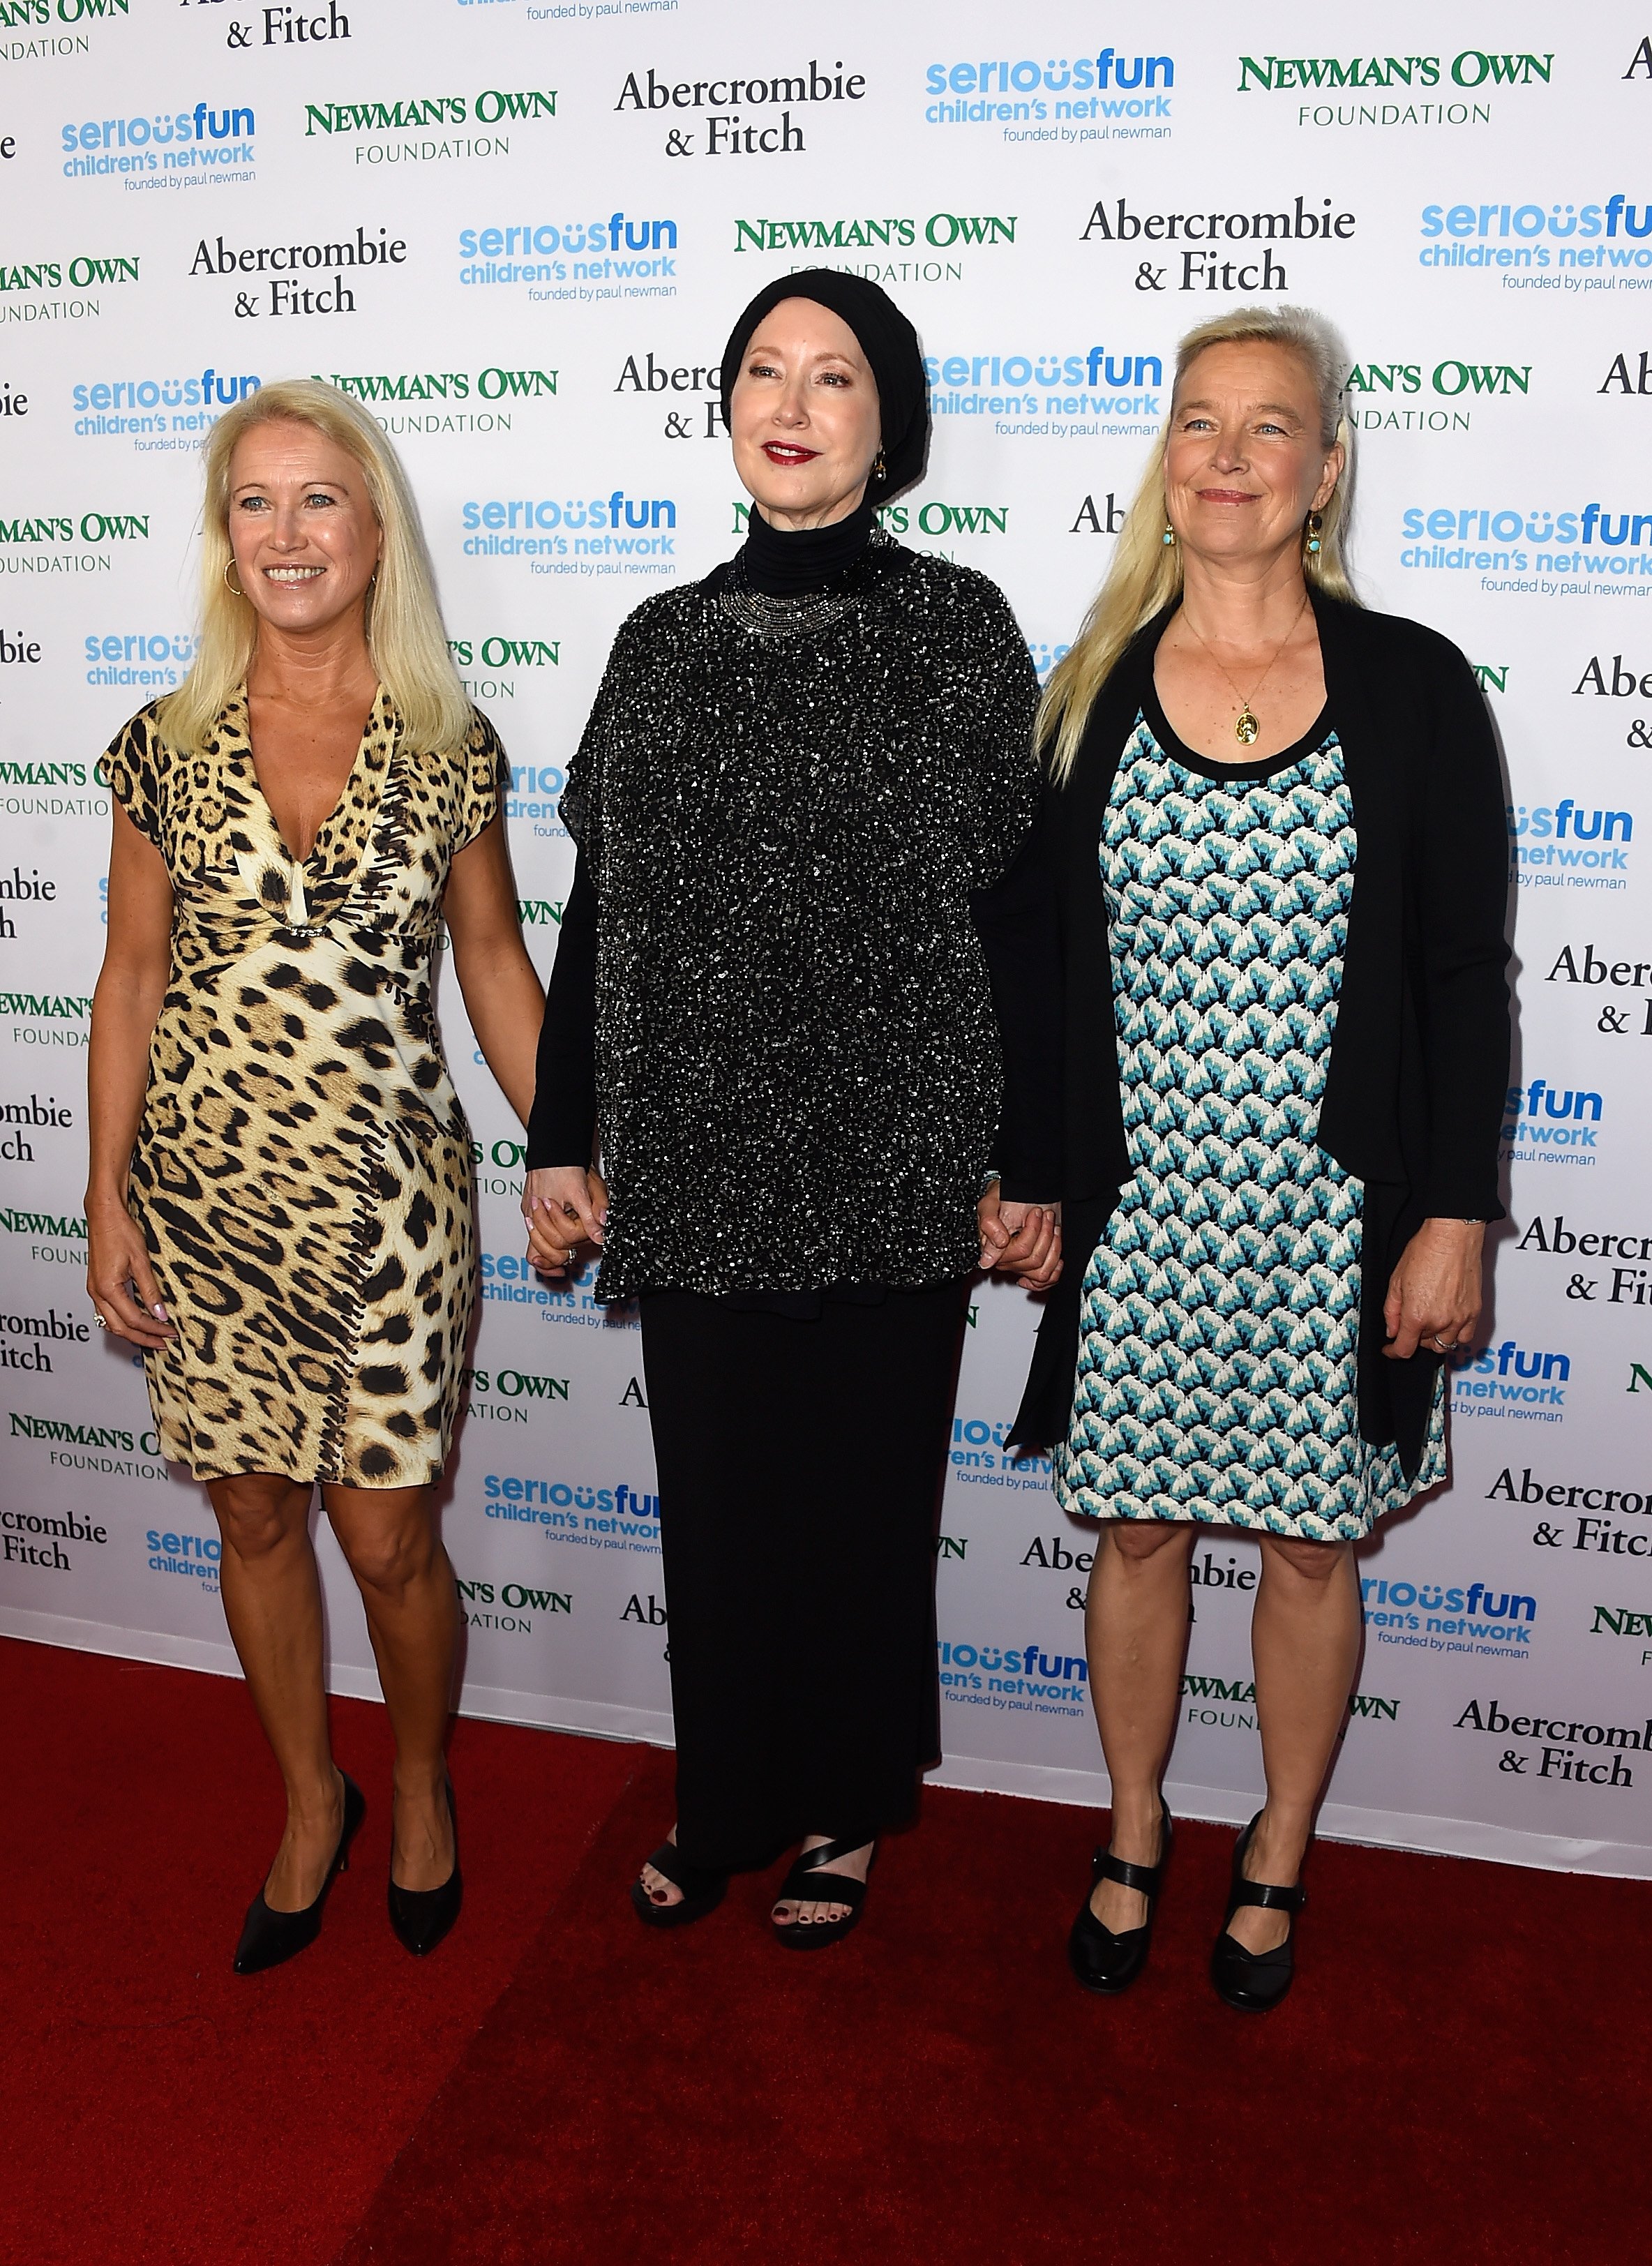 Clea, Susan, and Nell Newman at An Evening of Serious Fun Celebrating The Legacy of Paul Newman on May 14, 2015, in Hollywood, California. | Source: Getty Images